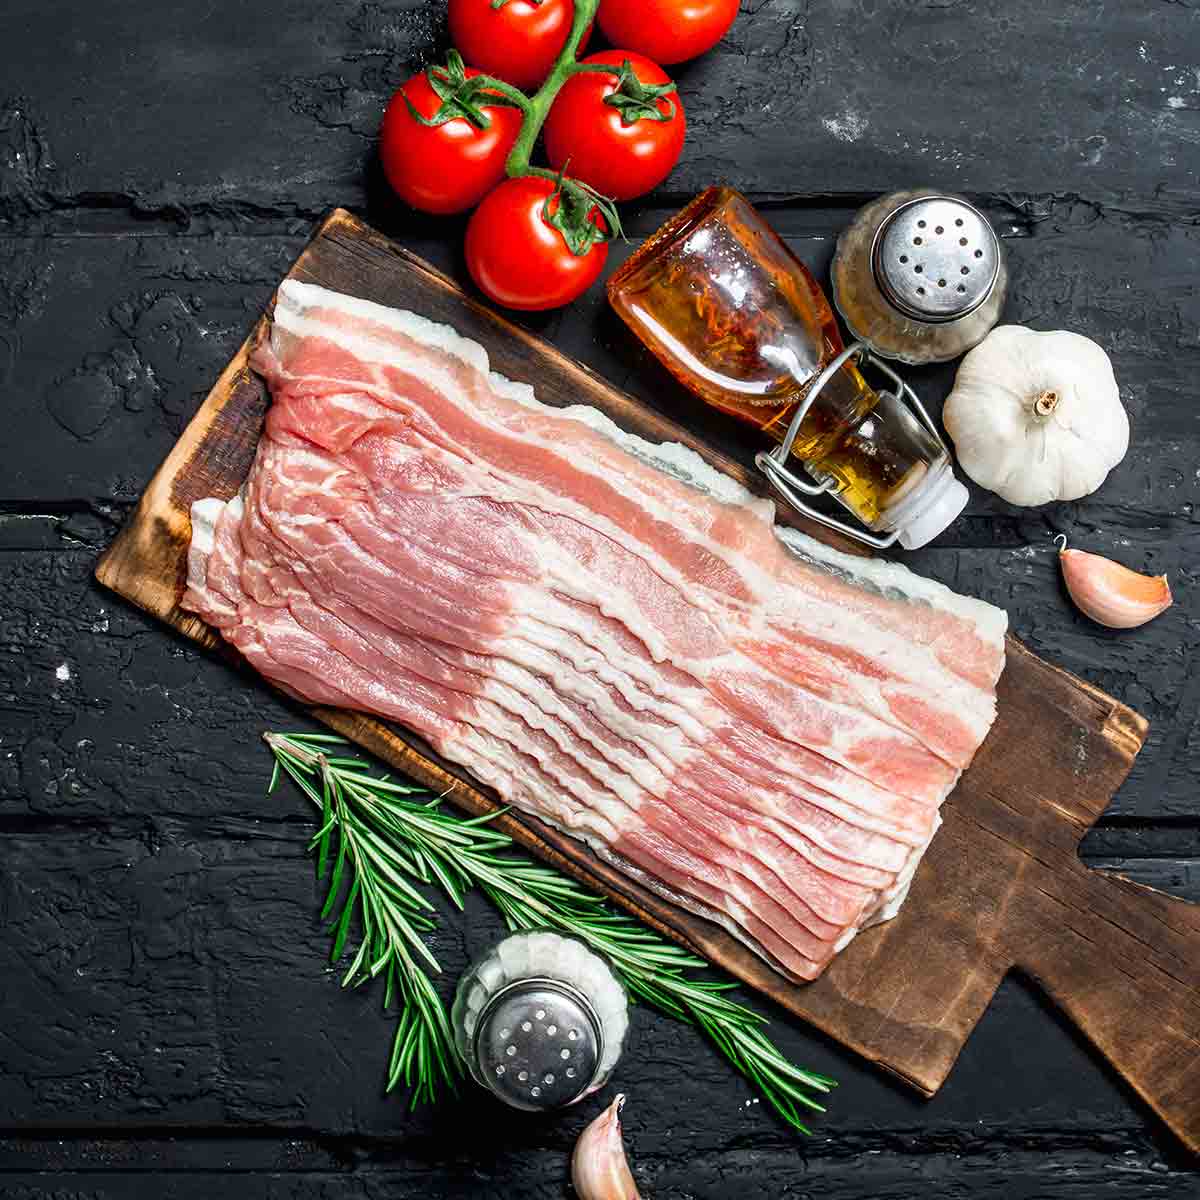 Strips of raw bacon on a cutting board with tomatoes, garlic, and rosemary